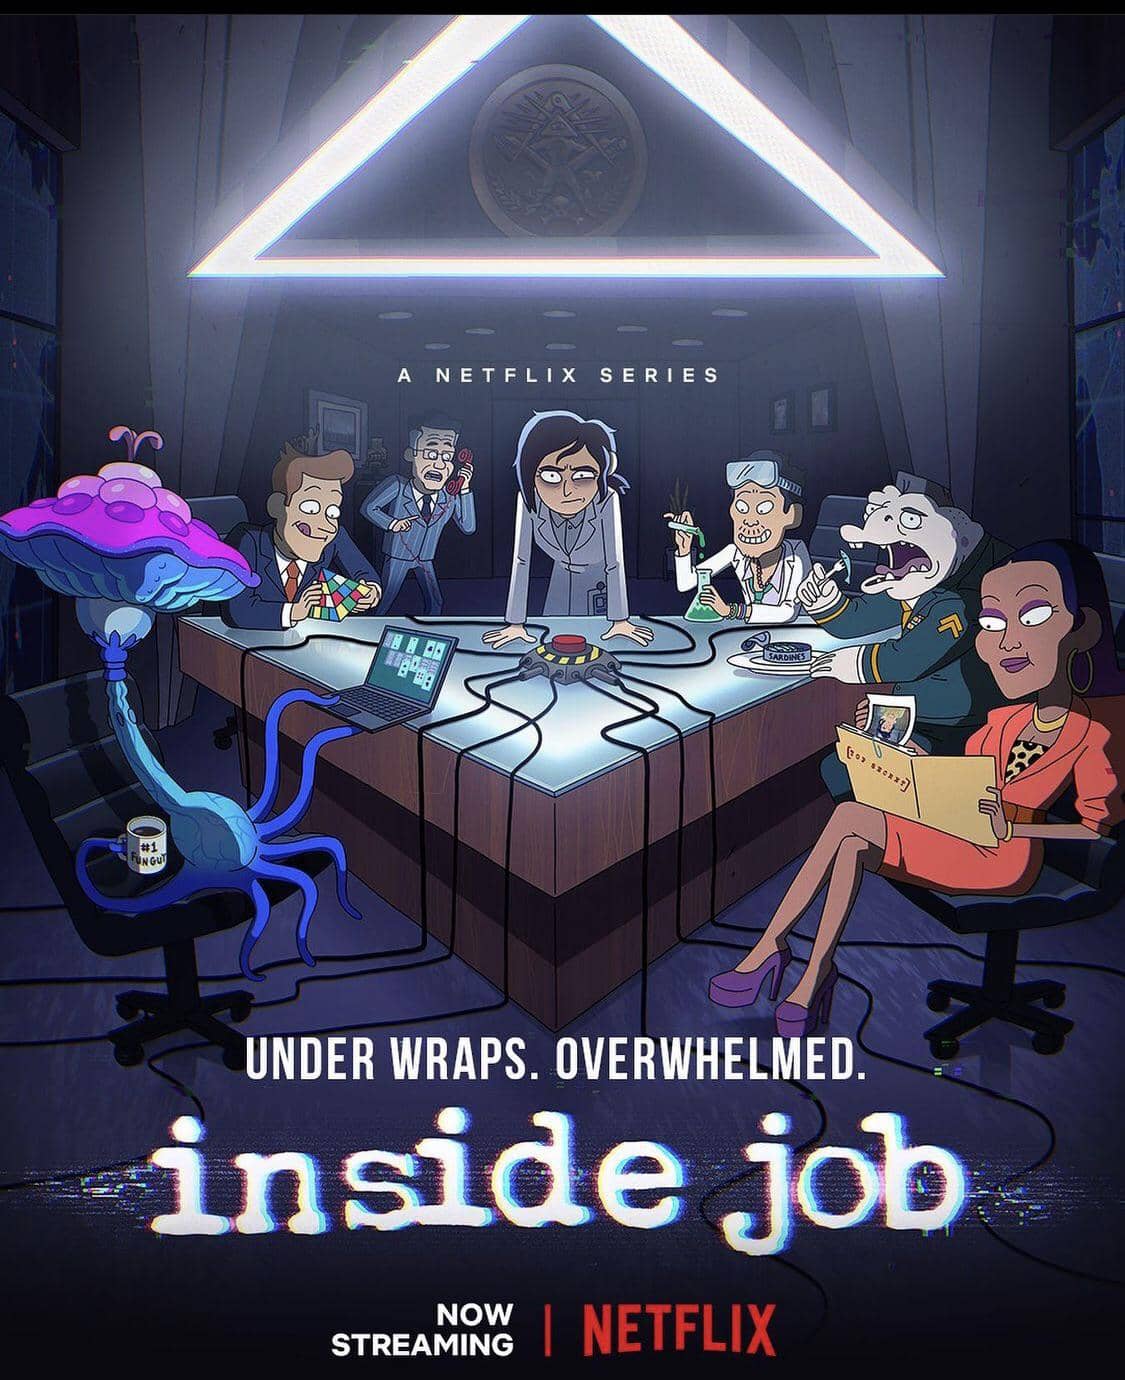 A cartoon of six people sitting around a triangle-shaped table with a red, doomsday button in the middle and wires connected to it. The group consists of a magenta and blue mushroom-shaped alien using a computer, a blonde man in a suit playing with a rubix cube, a tired woman in a lab coat, an asian man mixing chemicals with goodles and a lab coat, a dolphin-man hybrid in a general uniform, and a black woman in a pants suit looking through a file. In the back, an older man in a suit is panicking on the phone. 